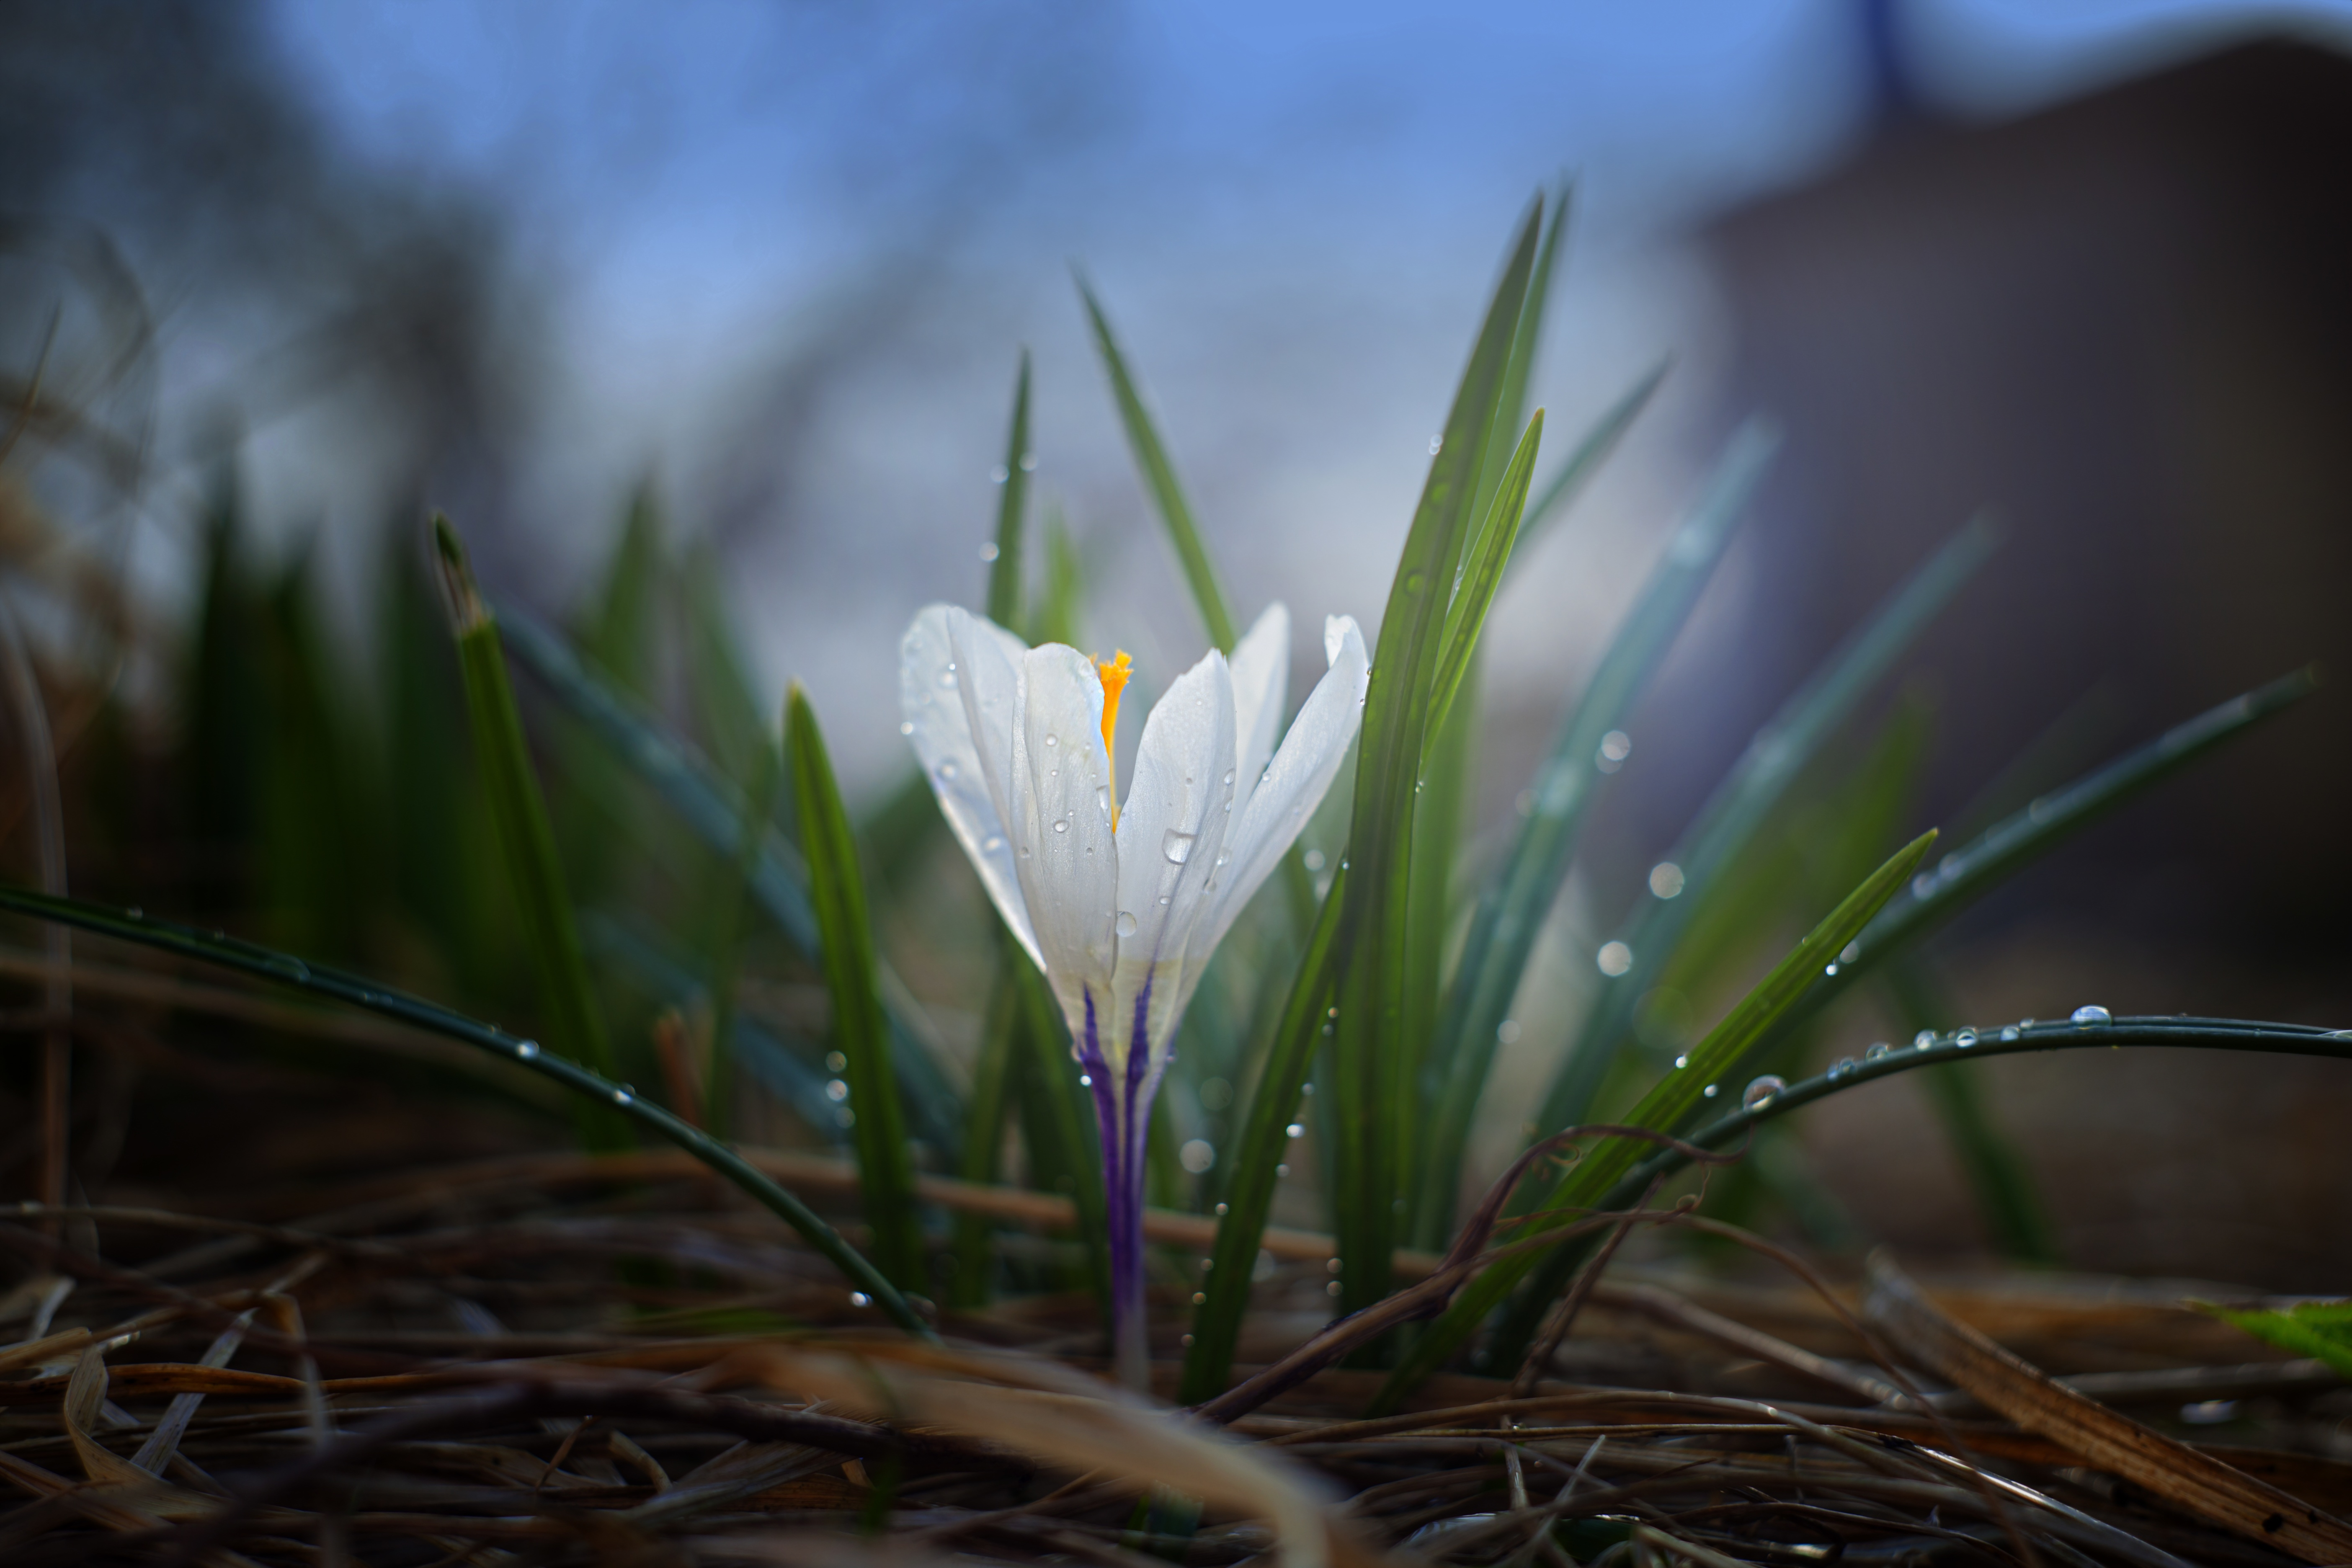 The First Crocus of Spring by Aleksey Kutsar